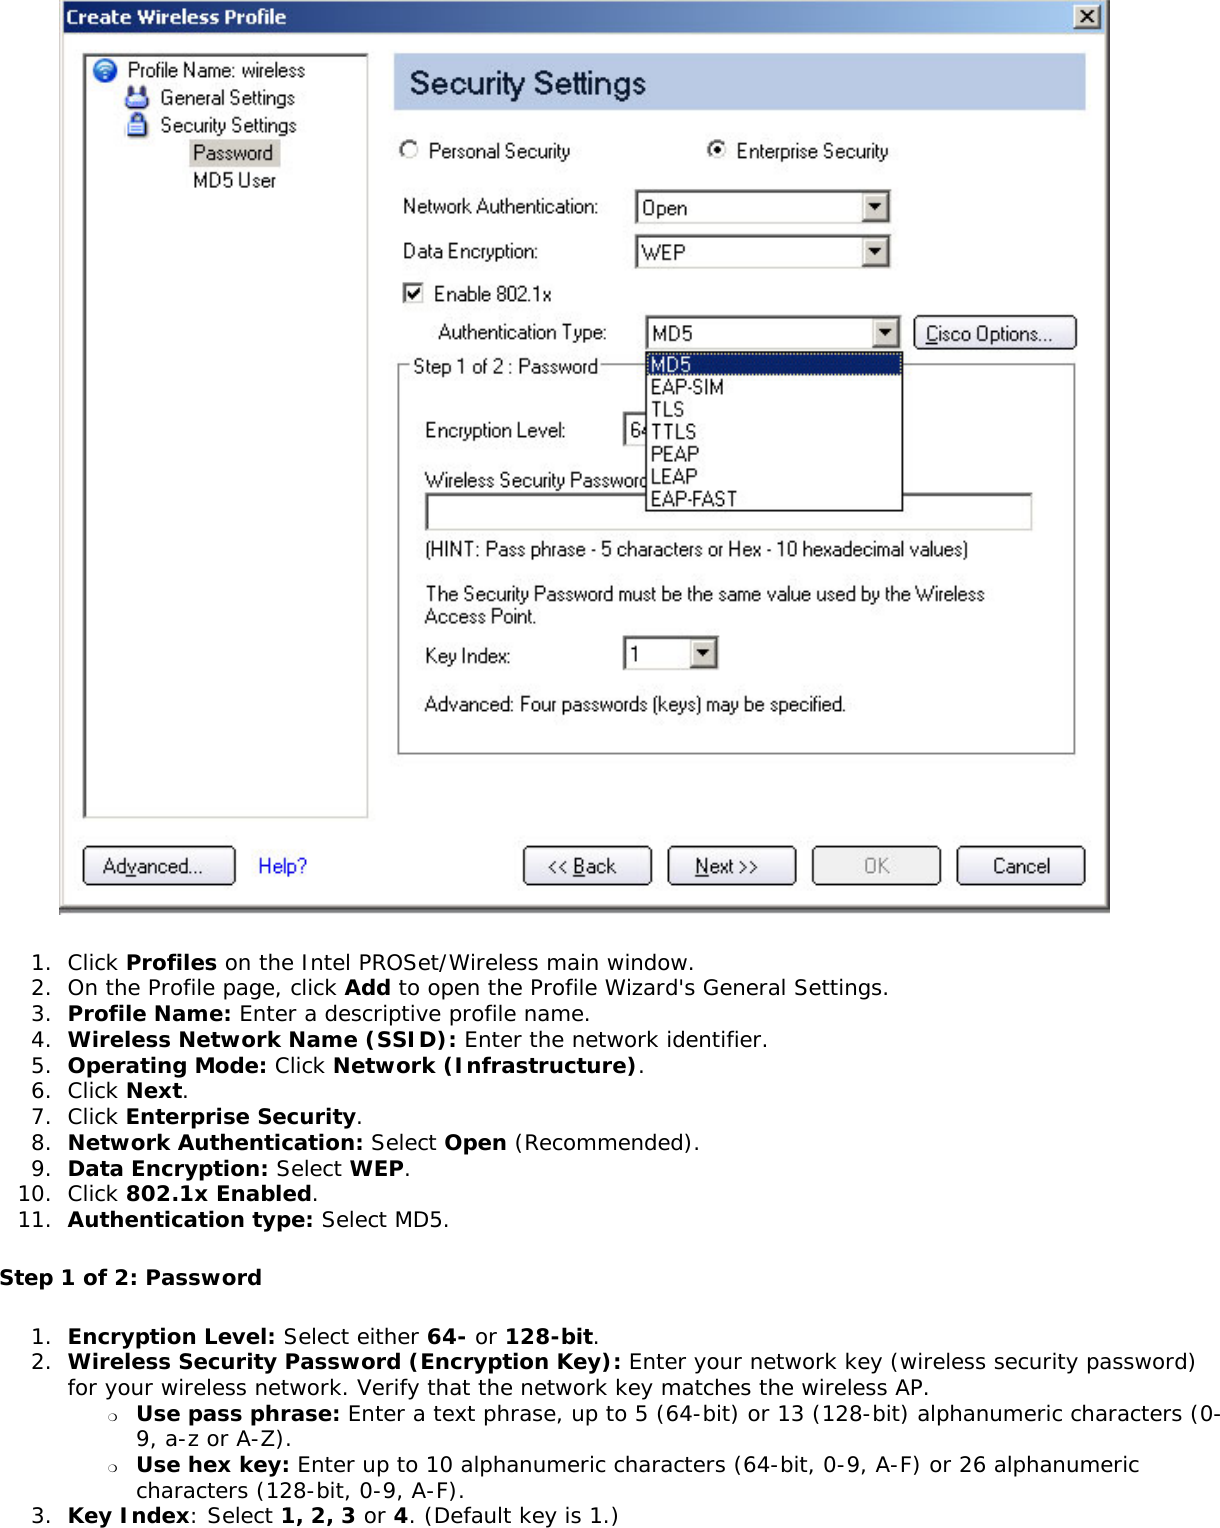  1.  Click Profiles on the Intel PROSet/Wireless main window. 2.  On the Profile page, click Add to open the Profile Wizard&apos;s General Settings.3.  Profile Name: Enter a descriptive profile name.4.  Wireless Network Name (SSID): Enter the network identifier. 5.  Operating Mode: Click Network (Infrastructure). 6.  Click Next.7.  Click Enterprise Security.8.  Network Authentication: Select Open (Recommended). 9.  Data Encryption: Select WEP.10.  Click 802.1x Enabled.11.  Authentication type: Select MD5.Step 1 of 2: Password 1.  Encryption Level: Select either 64- or 128-bit.2.  Wireless Security Password (Encryption Key): Enter your network key (wireless security password) for your wireless network. Verify that the network key matches the wireless AP. ❍     Use pass phrase: Enter a text phrase, up to 5 (64-bit) or 13 (128-bit) alphanumeric characters (0-9, a-z or A-Z).❍     Use hex key: Enter up to 10 alphanumeric characters (64-bit, 0-9, A-F) or 26 alphanumeric characters (128-bit, 0-9, A-F).3.  Key Index: Select 1, 2, 3 or 4. (Default key is 1.)